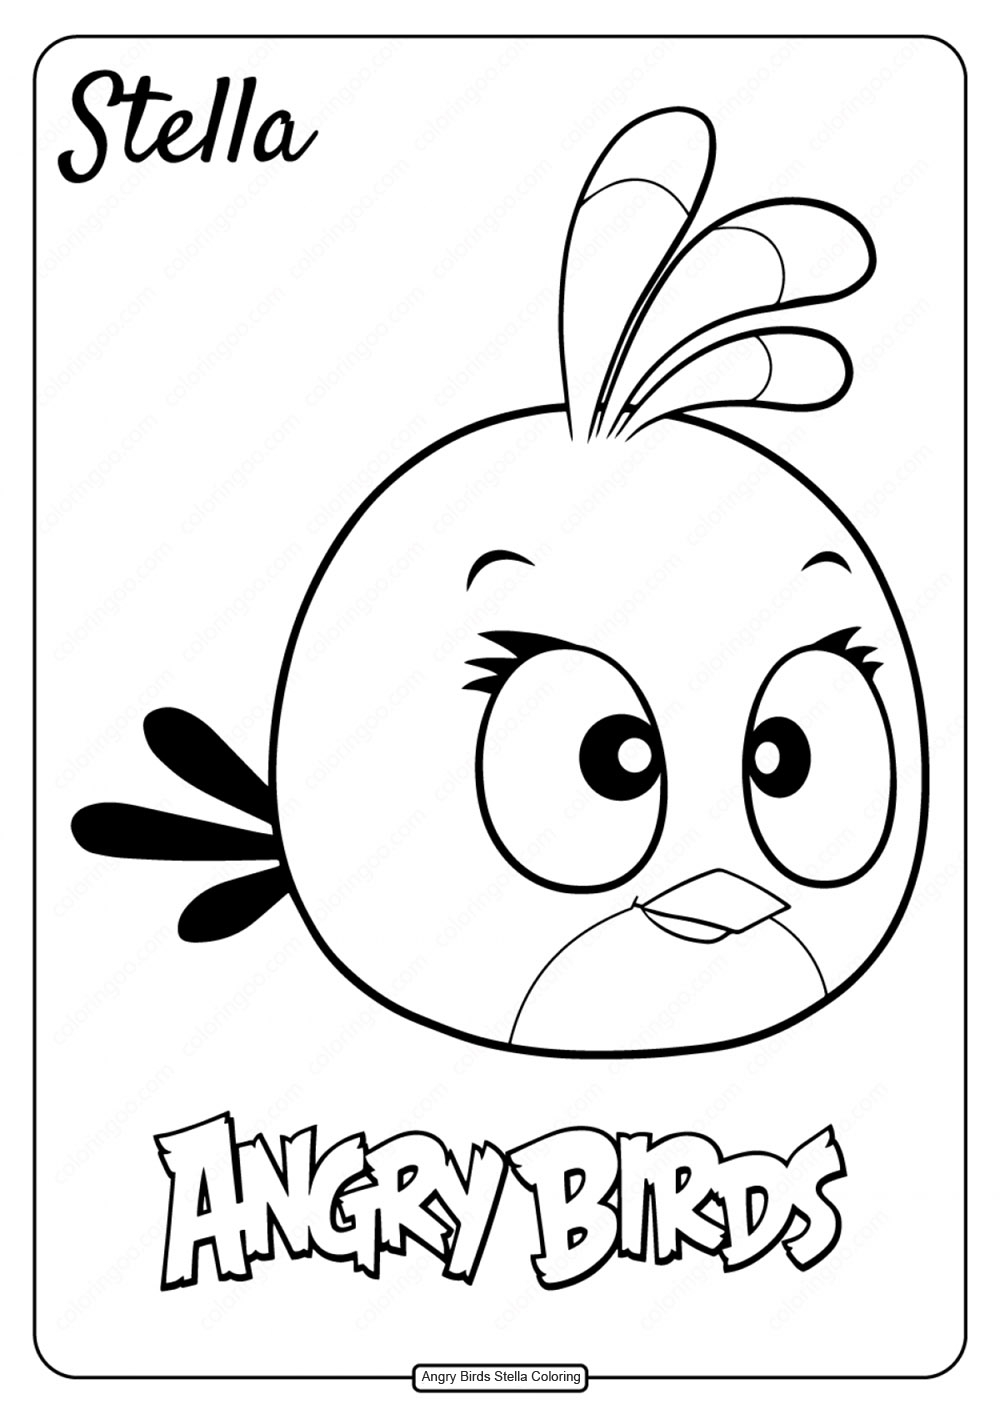 Squishmallows Coloring Pages - Free Printable Coloring Pages for Kids